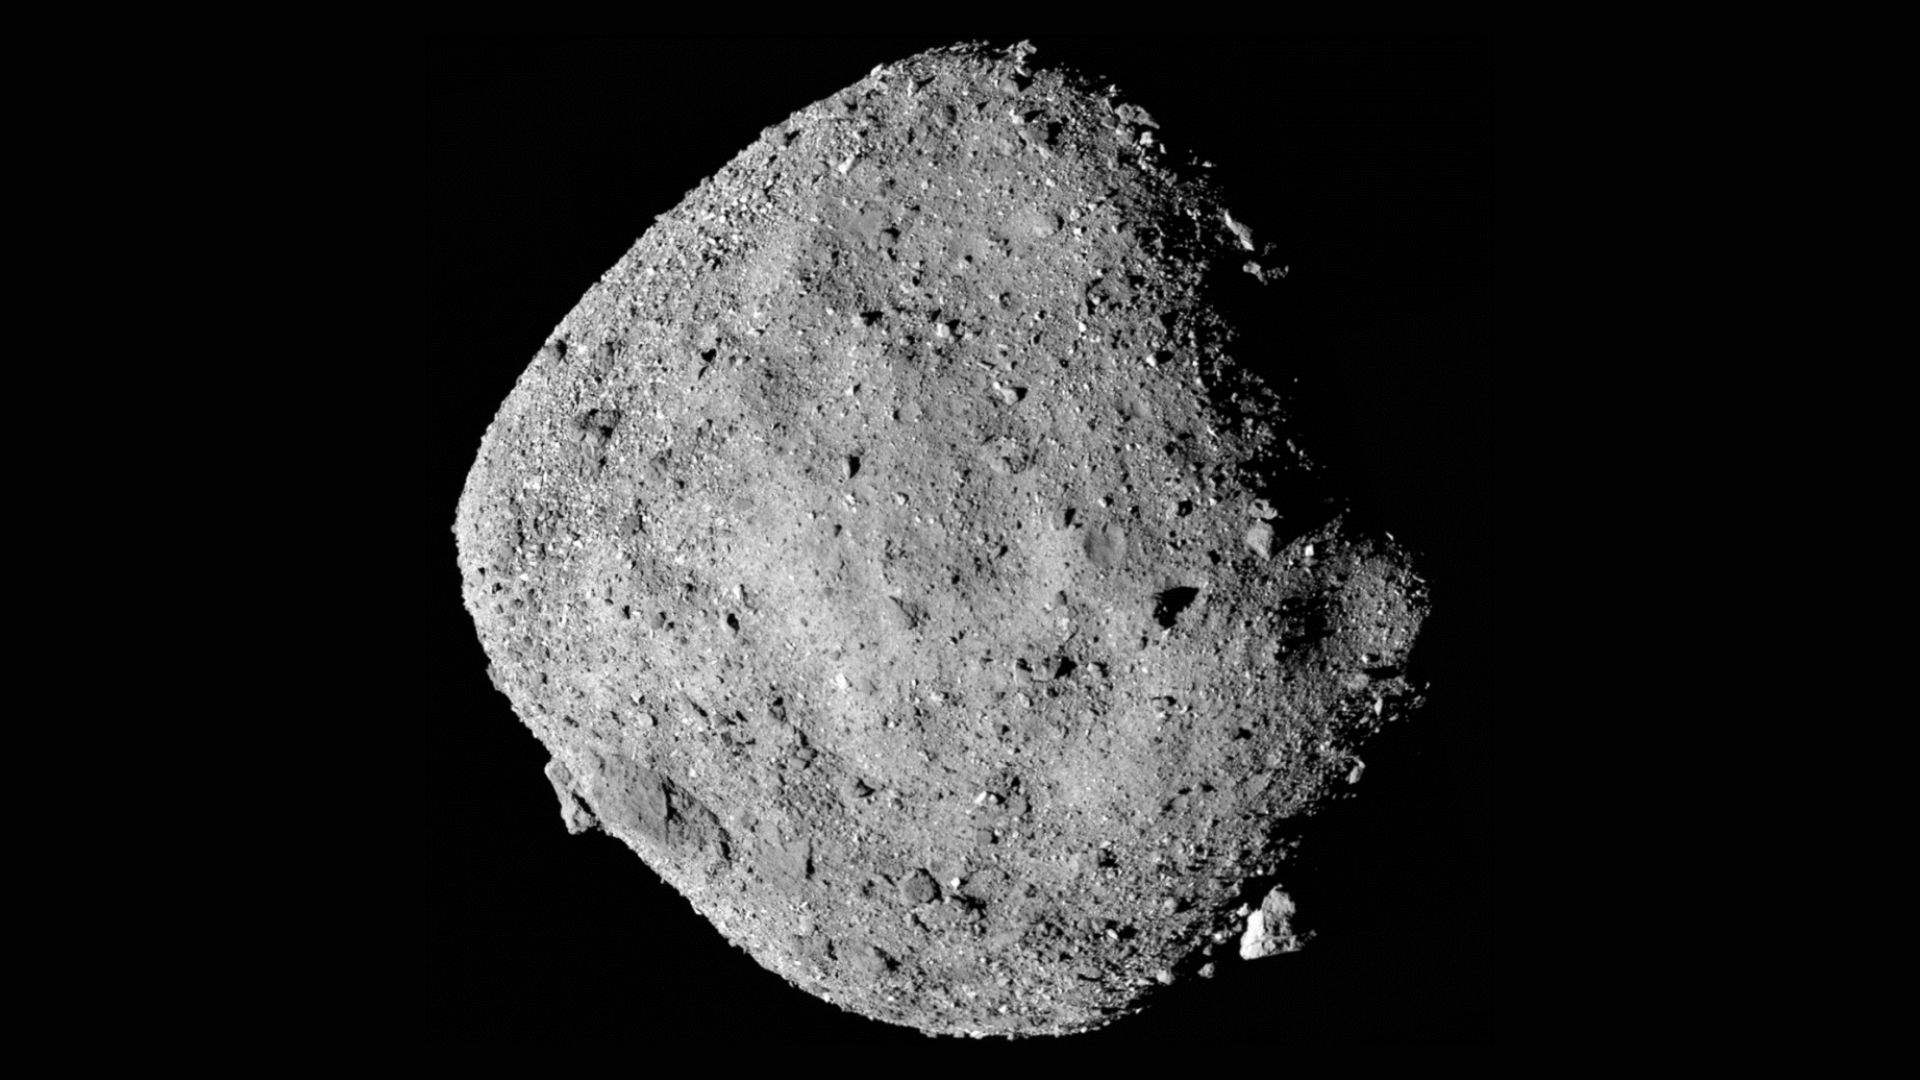 NASA vehicle collision with an asteroid last year caused a &quot;rock cloud&quot;